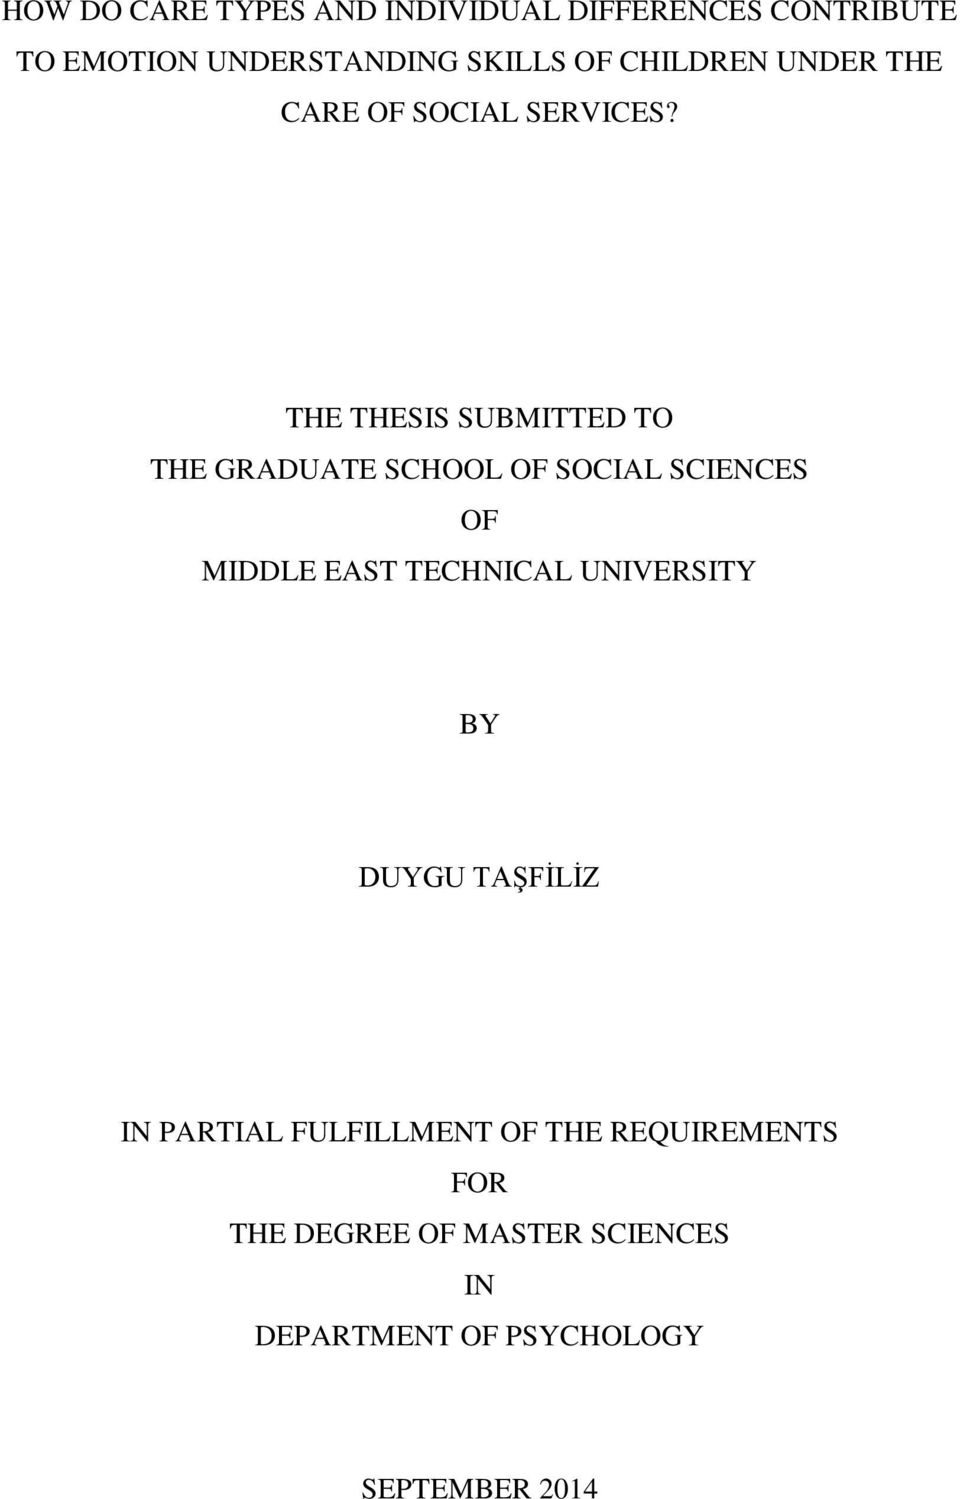 THE THESIS SUBMITTED TO THE GRADUATE SCHOOL OF SOCIAL SCIENCES OF MIDDLE EAST TECHNICAL